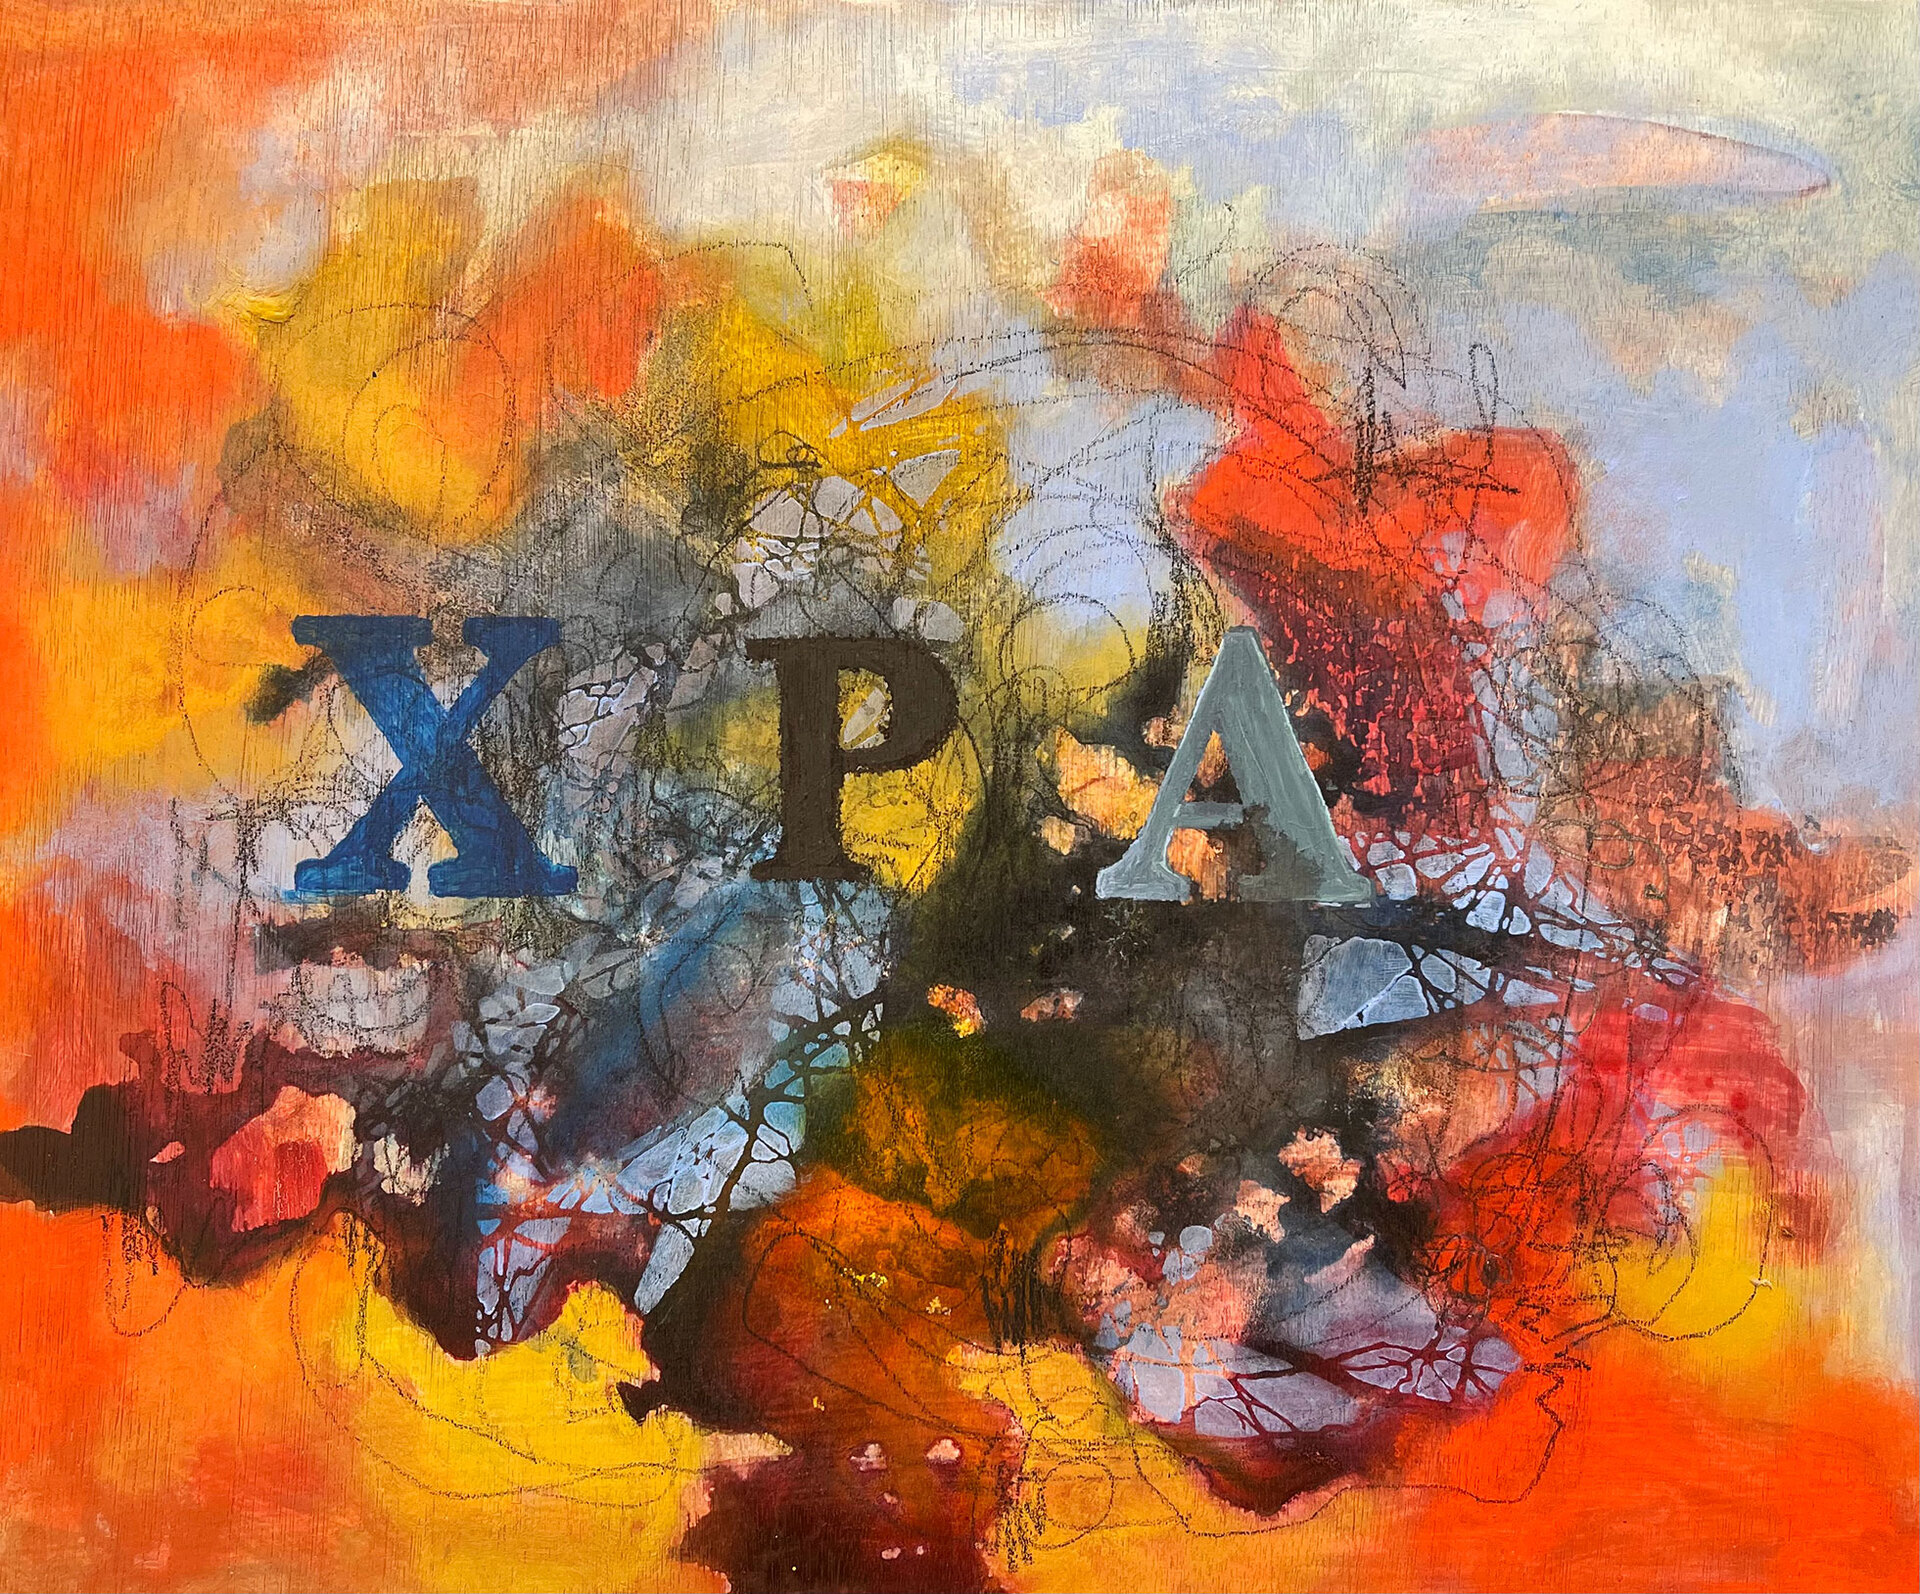 energetic, messy painting with what looks like crayon or charcoal scribbles. The background is a haze of orange, yellow, periwinkle, and dark and light grey. The letters 'XPA' are printed in a serif font over the background with each letter a different color: dark blue, dark brown, and grey.